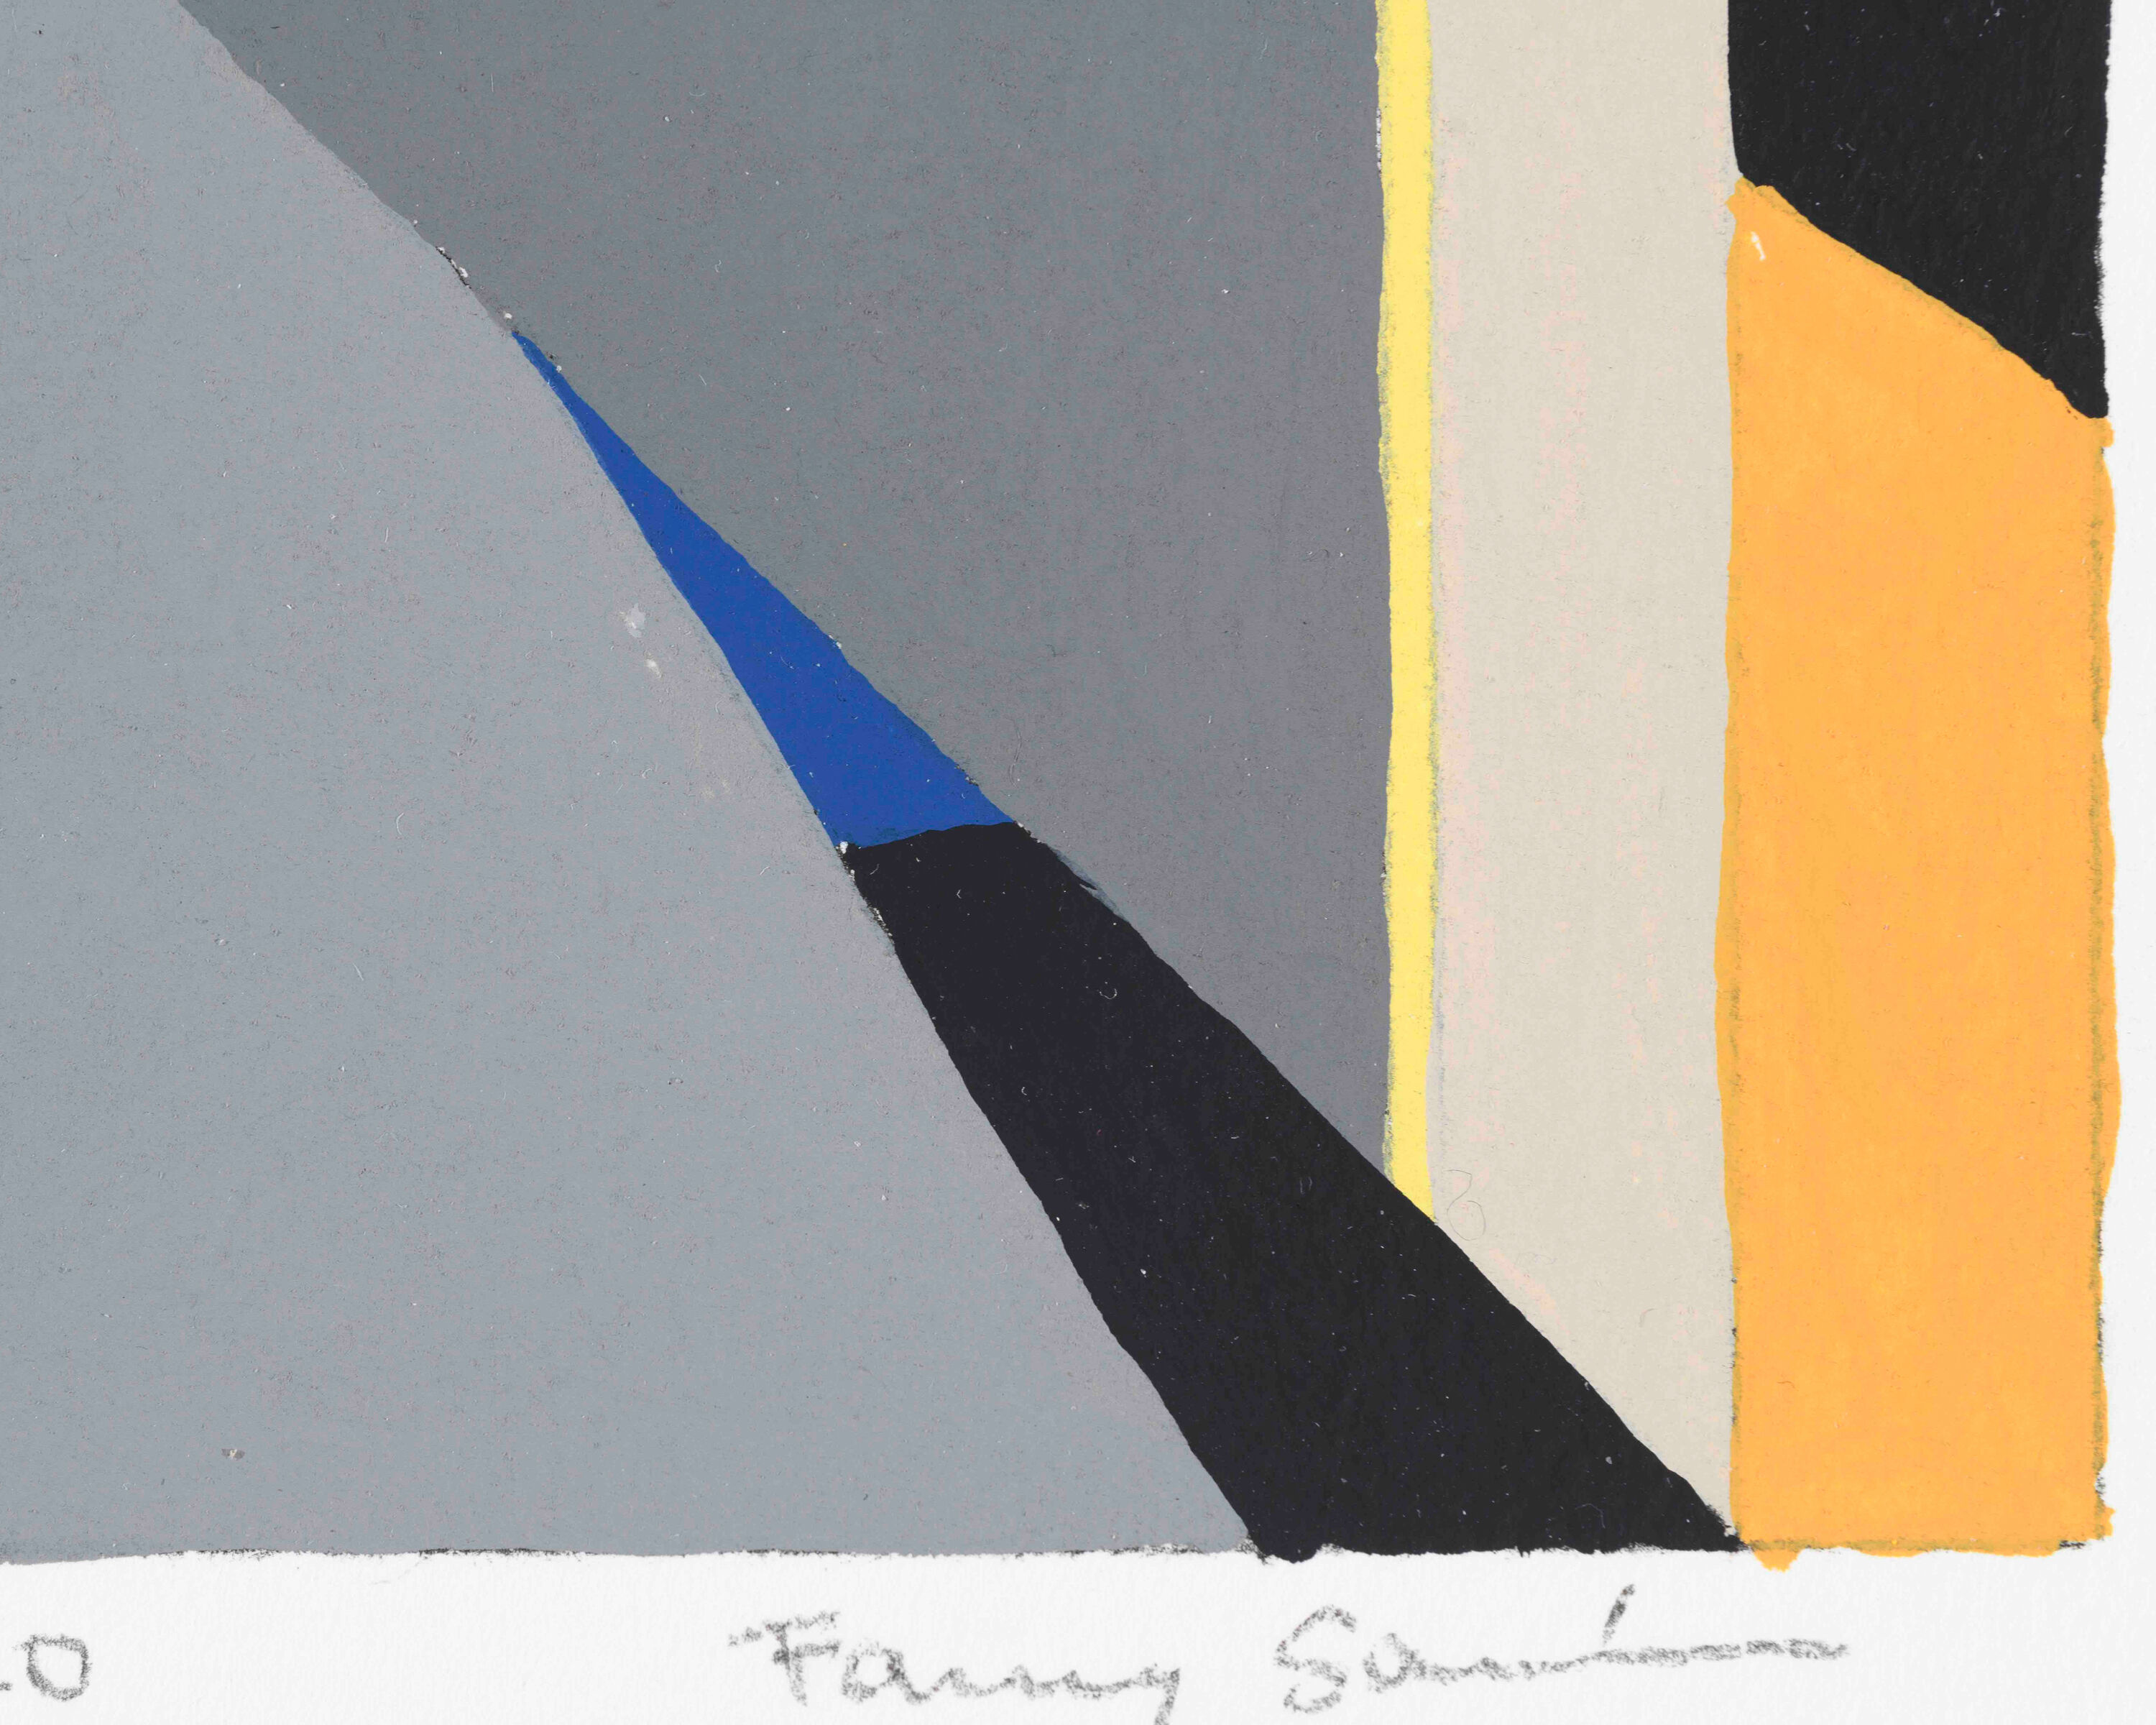 fanny sanin study for painting no 1 8 2020